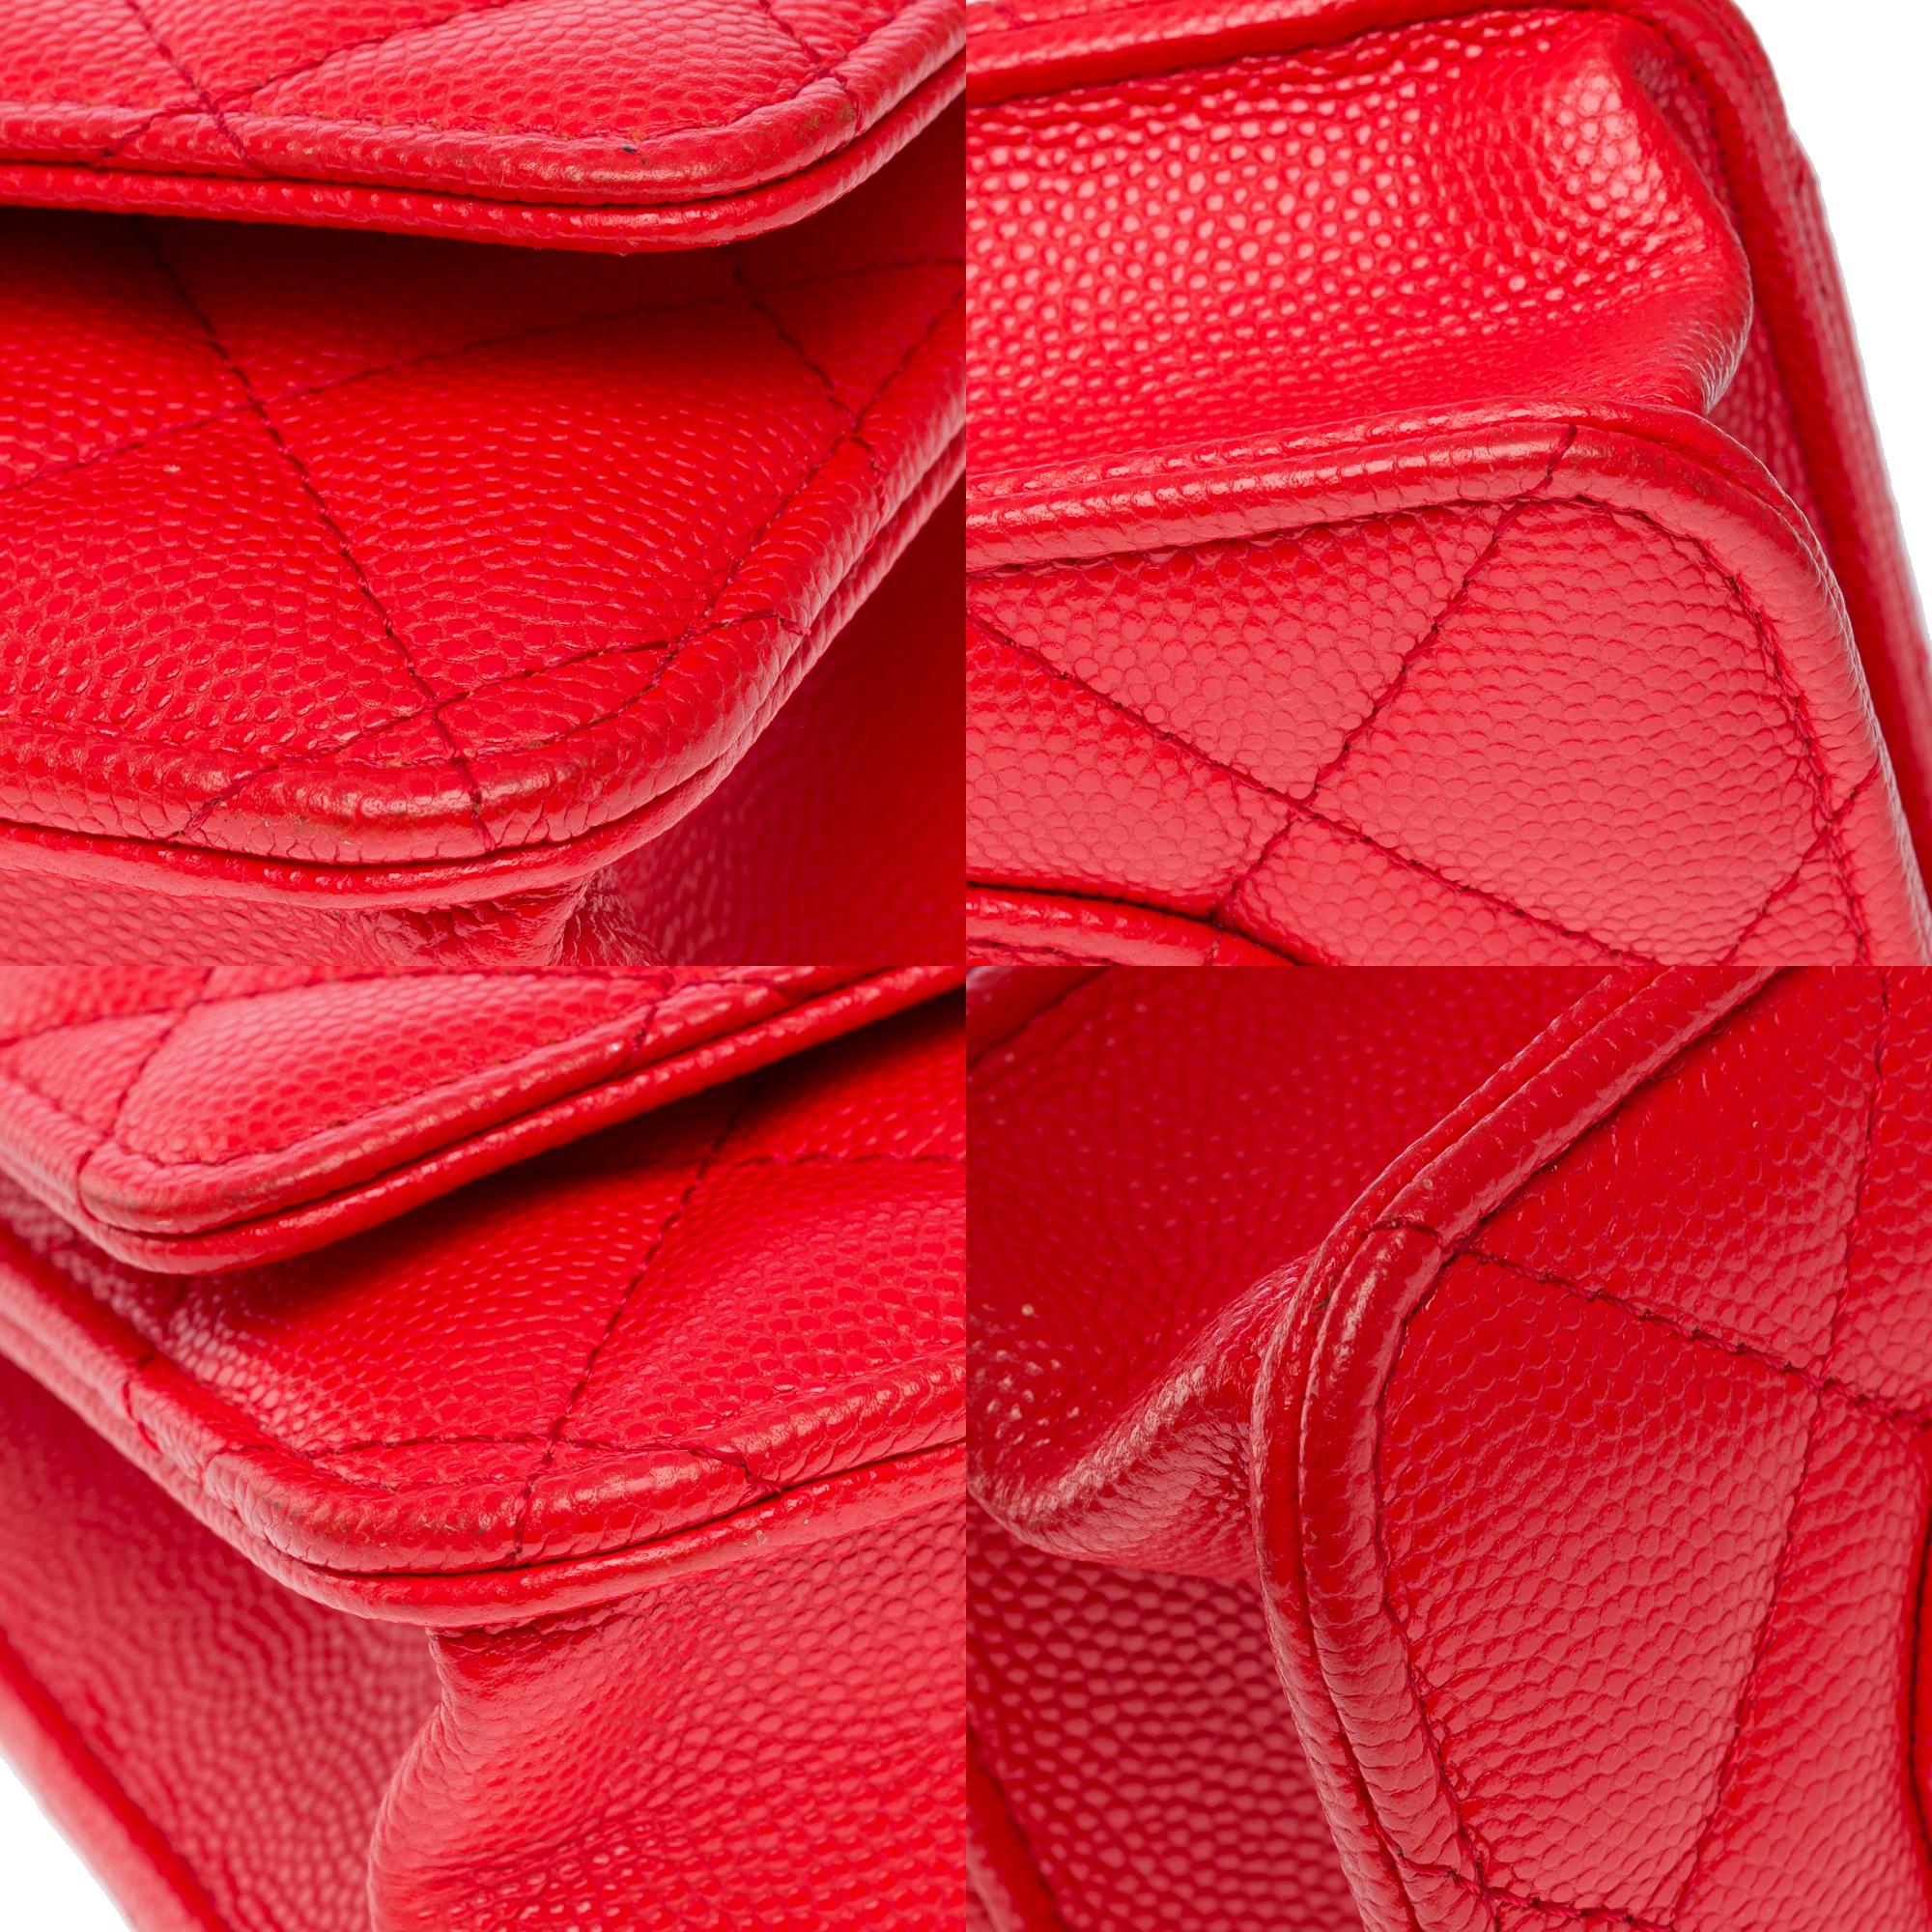 Chanel Wallet on Chain (WOC)  shoulder bag in Red quilted Caviar leather, GHW For Sale 8